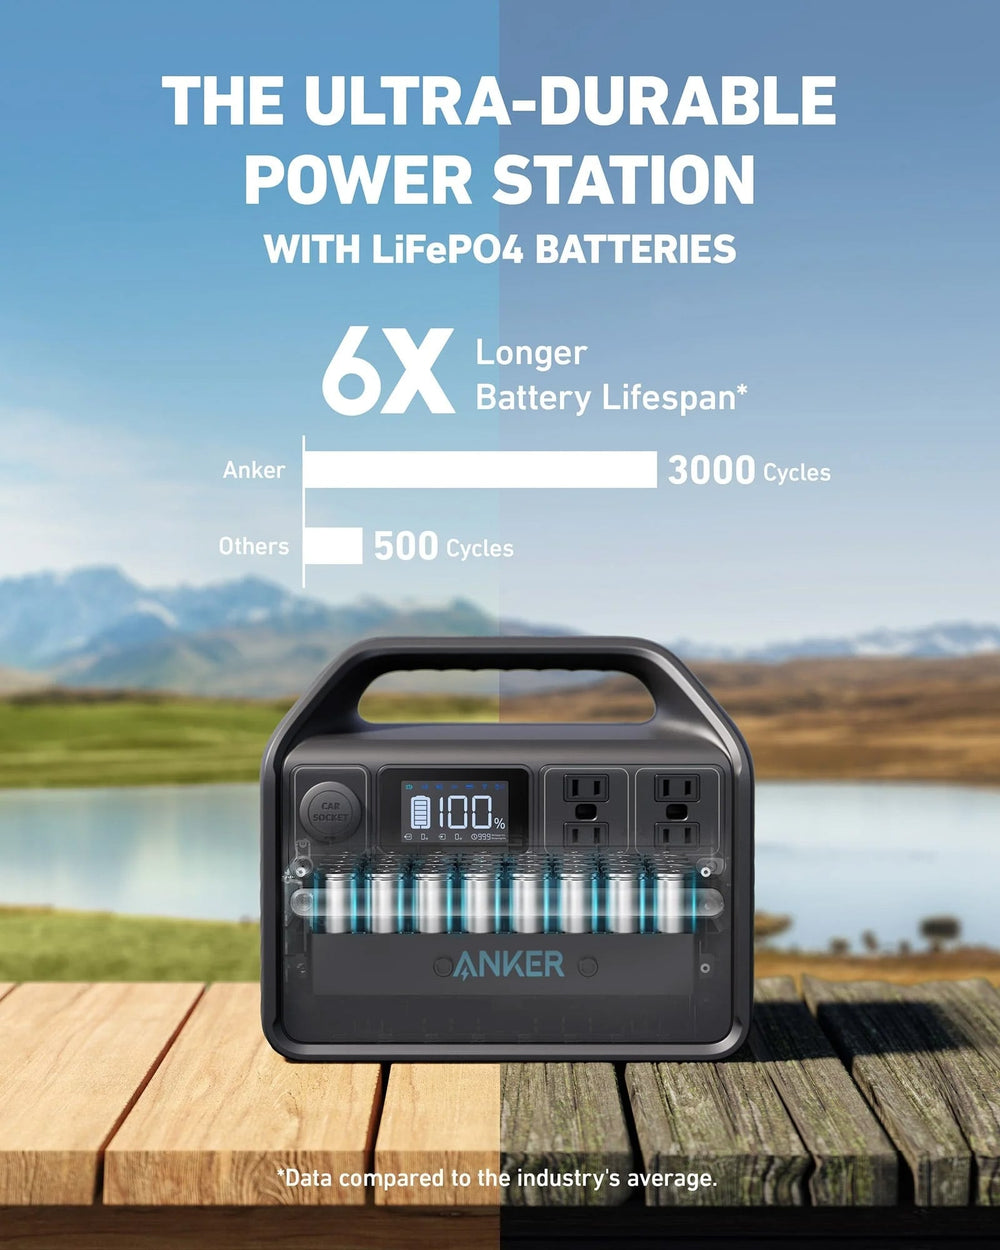 The PowerHouse 512Wh Is An Ultra-Durable Power Station